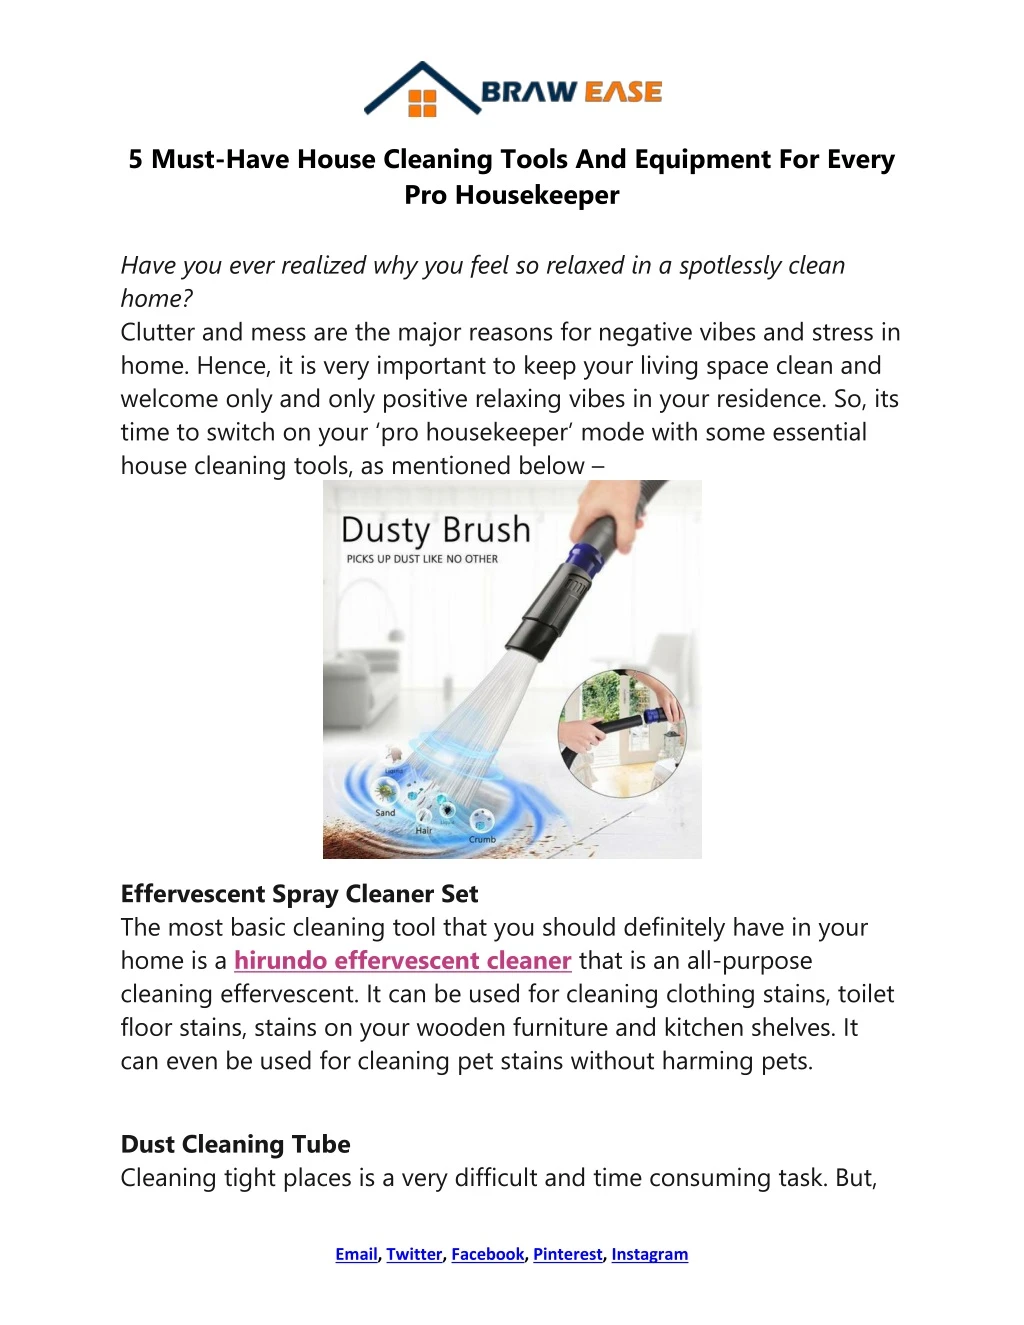 5 must have house cleaning tools and equipment